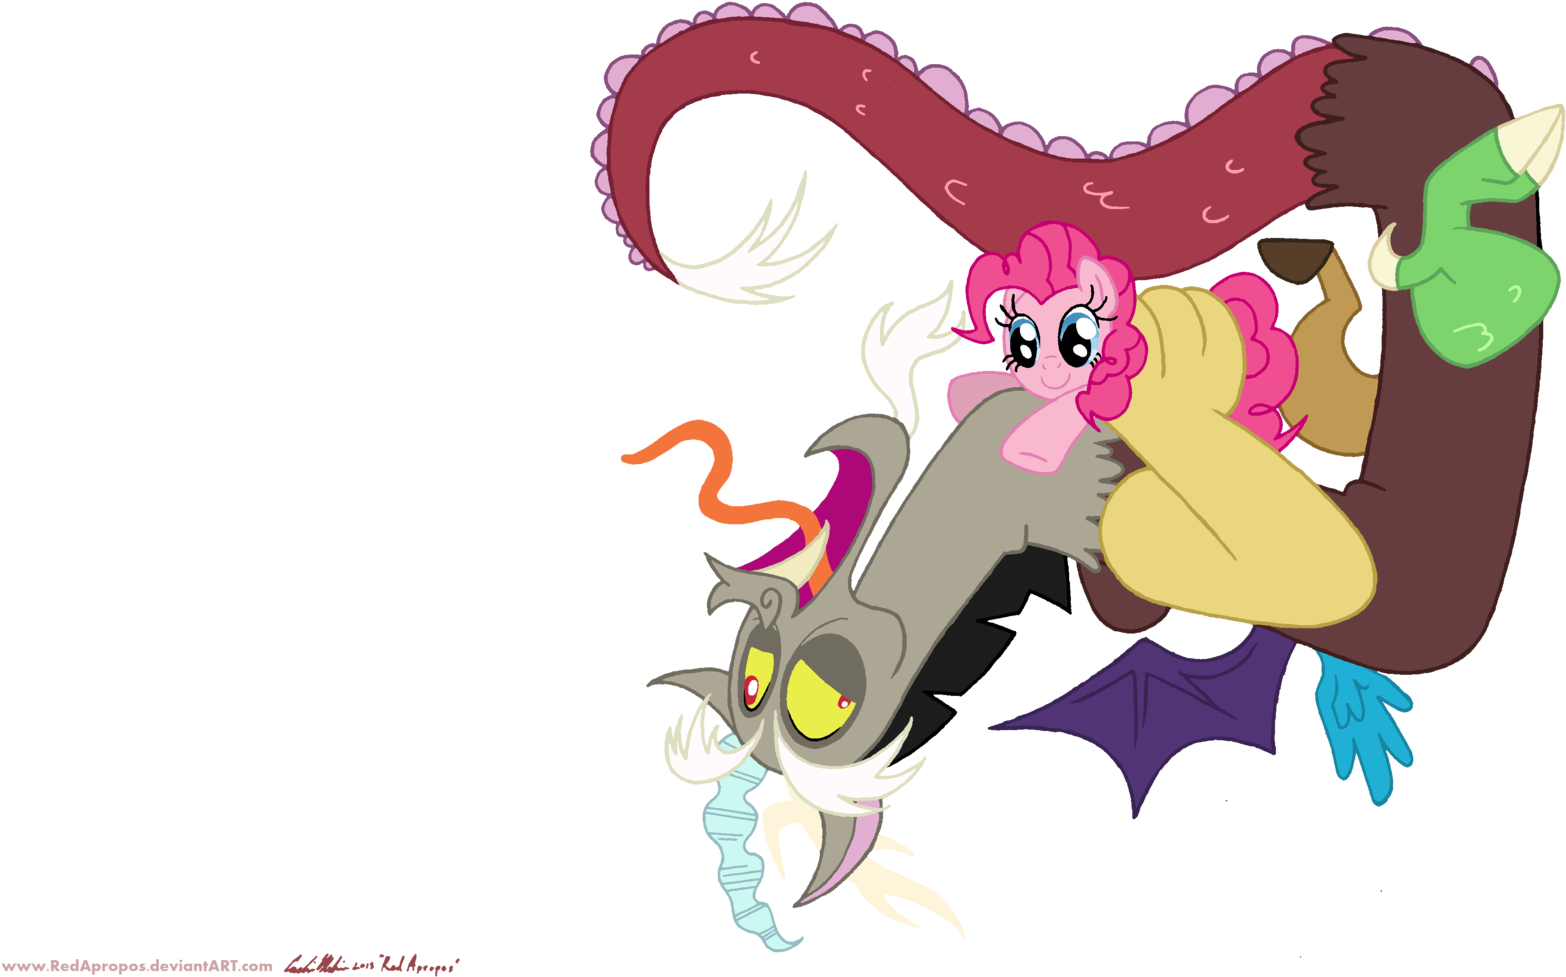 Pinkie Pie Has A Discord By Redapropos - Discord And Pinkie Pie (1600x1000)